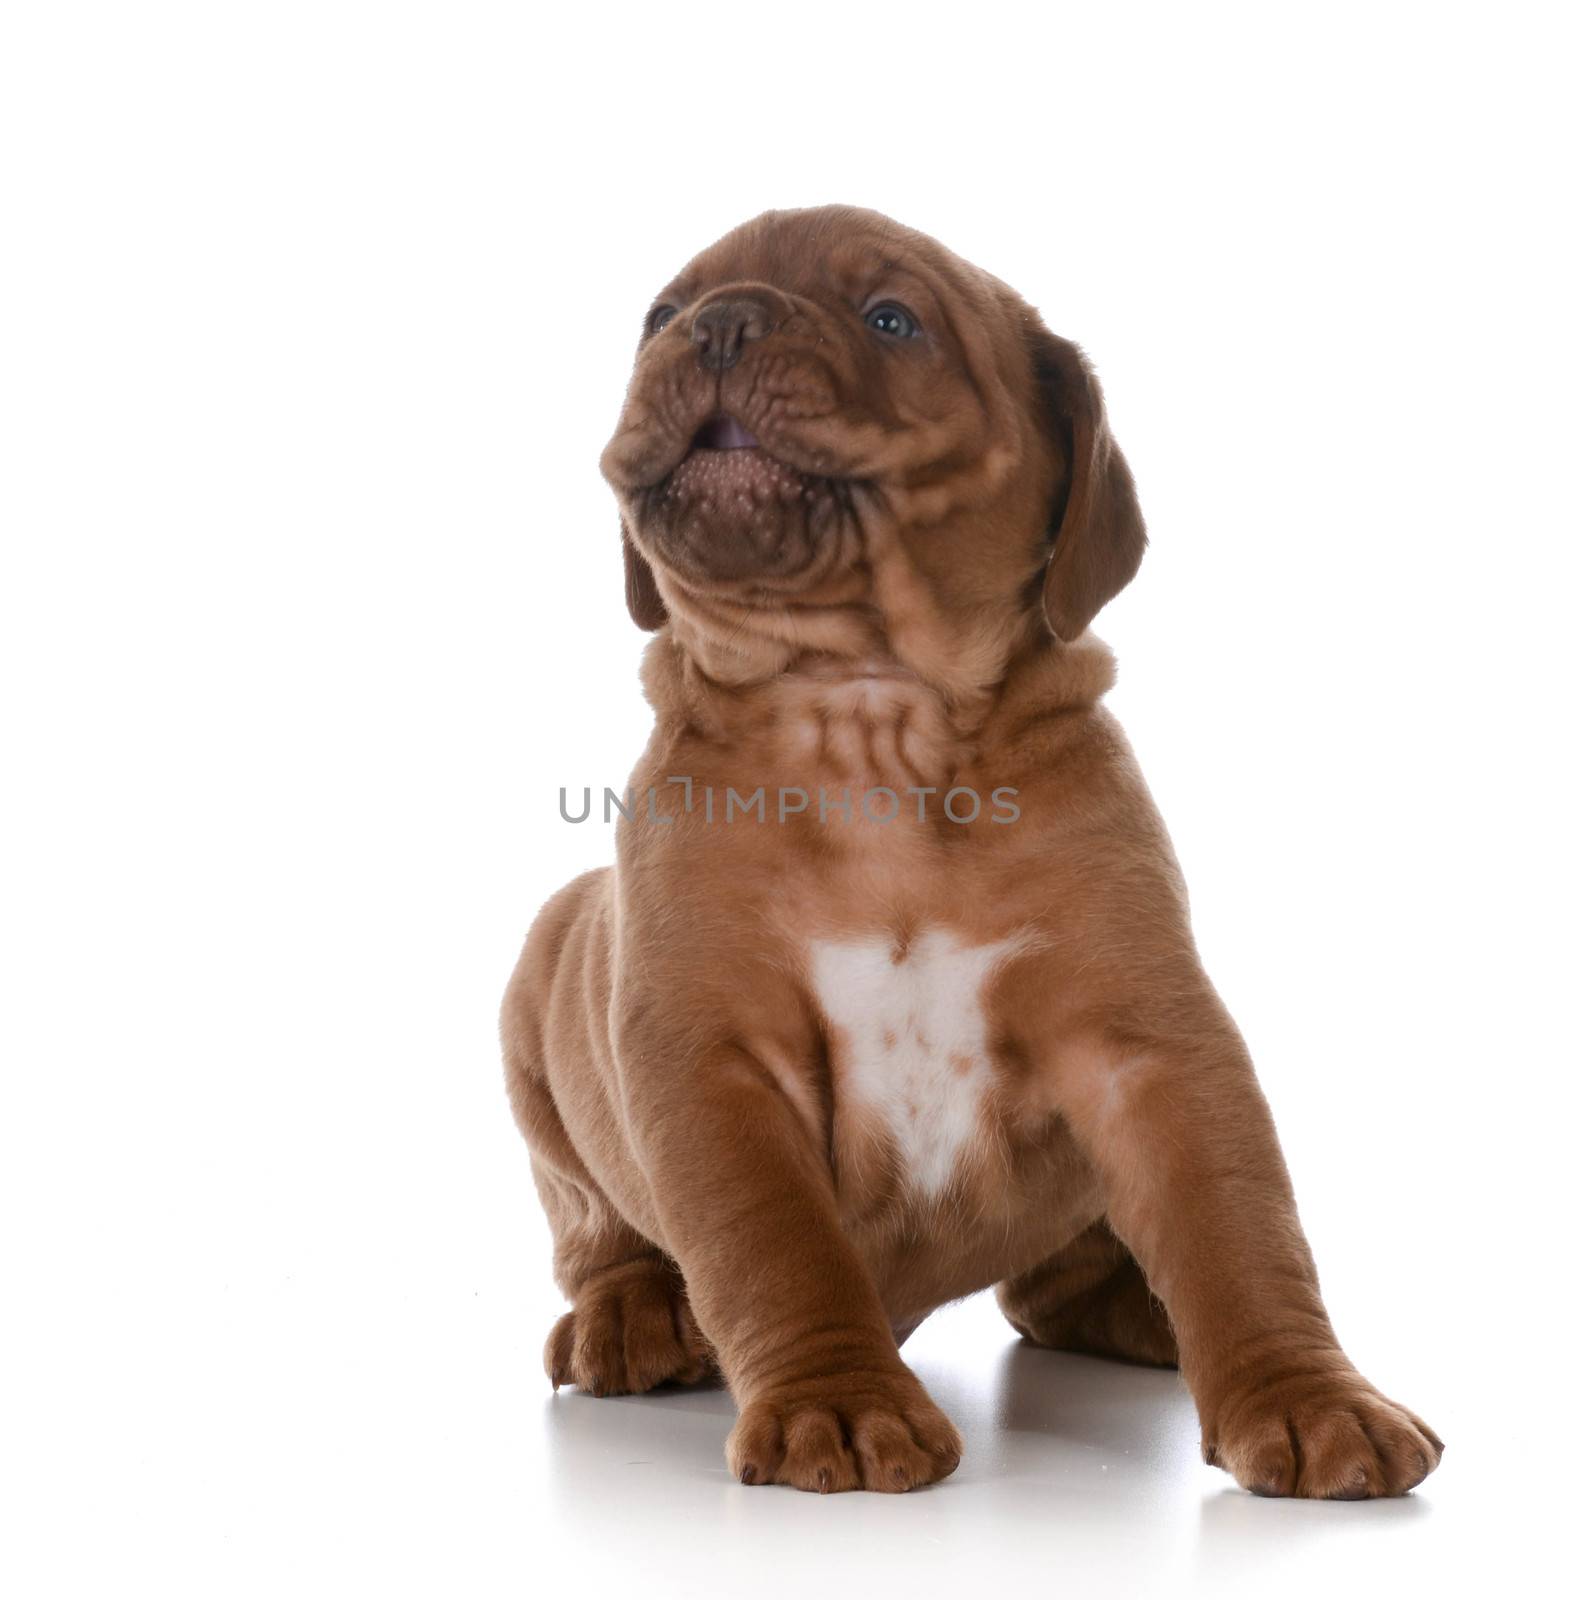 puppy howling - dogue de bordeaux puppy with mouth open barking on white background